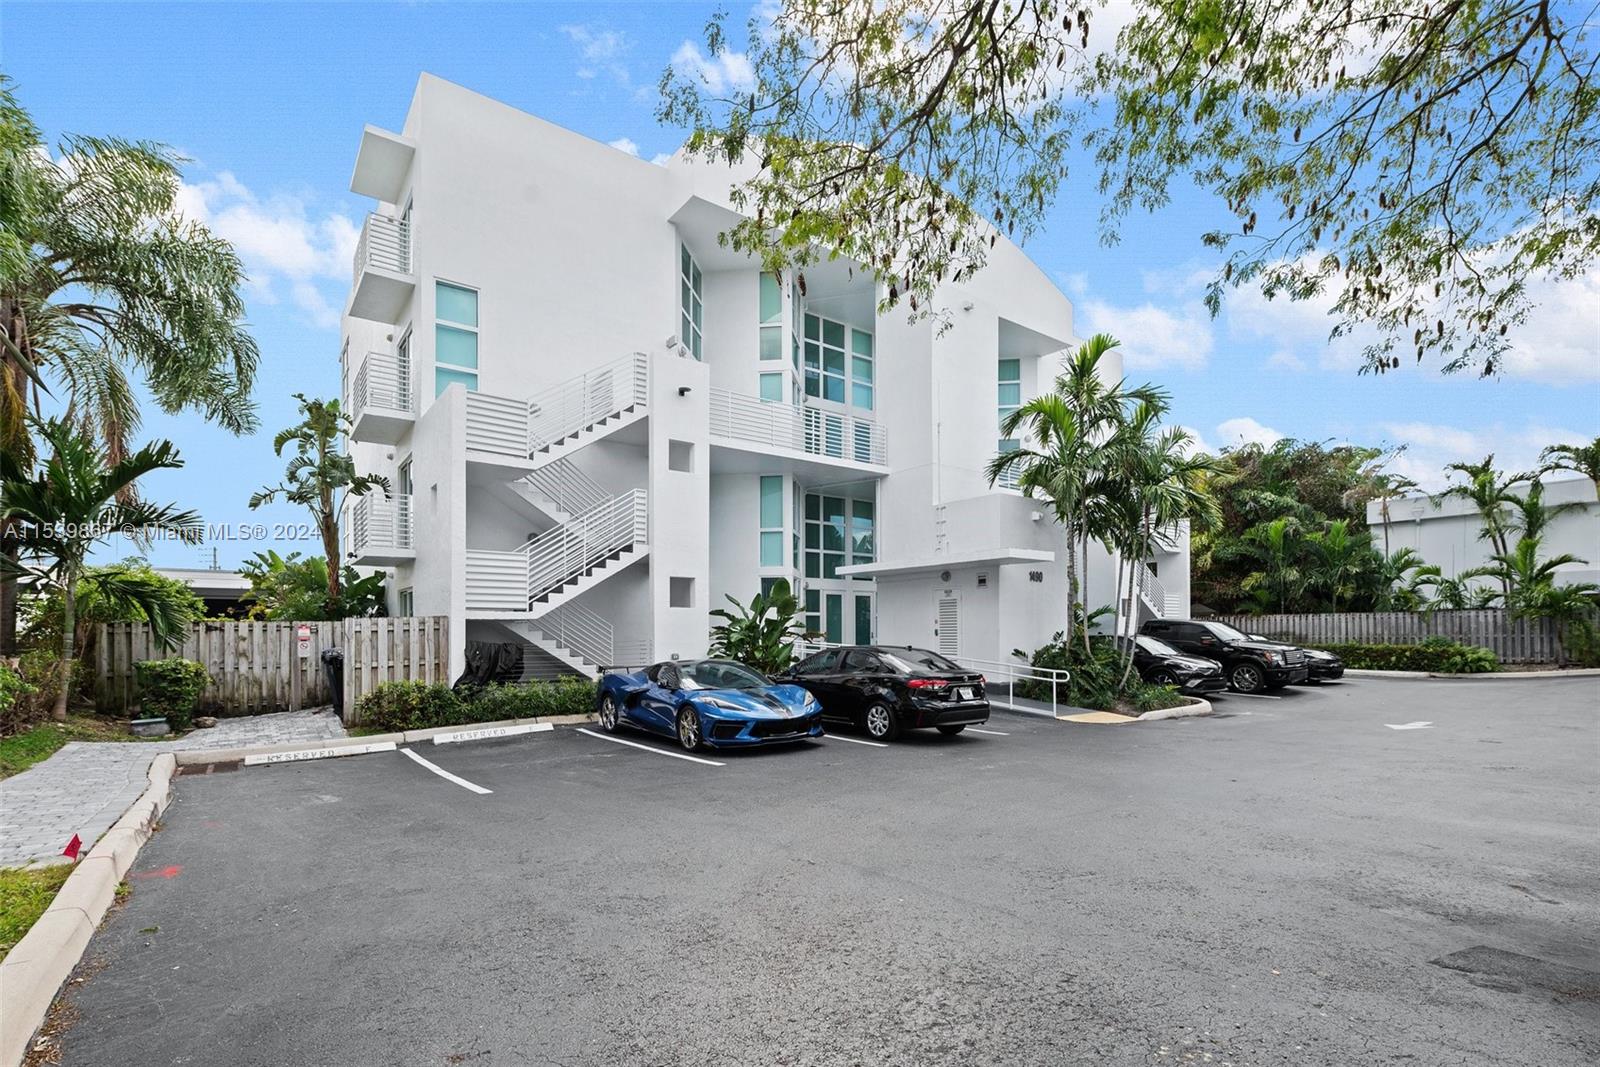 Property for Sale at 1490 Se 15th St St 201, Fort Lauderdale, Broward County, Florida - Bedrooms: 2 
Bathrooms: 2  - $1,600,000